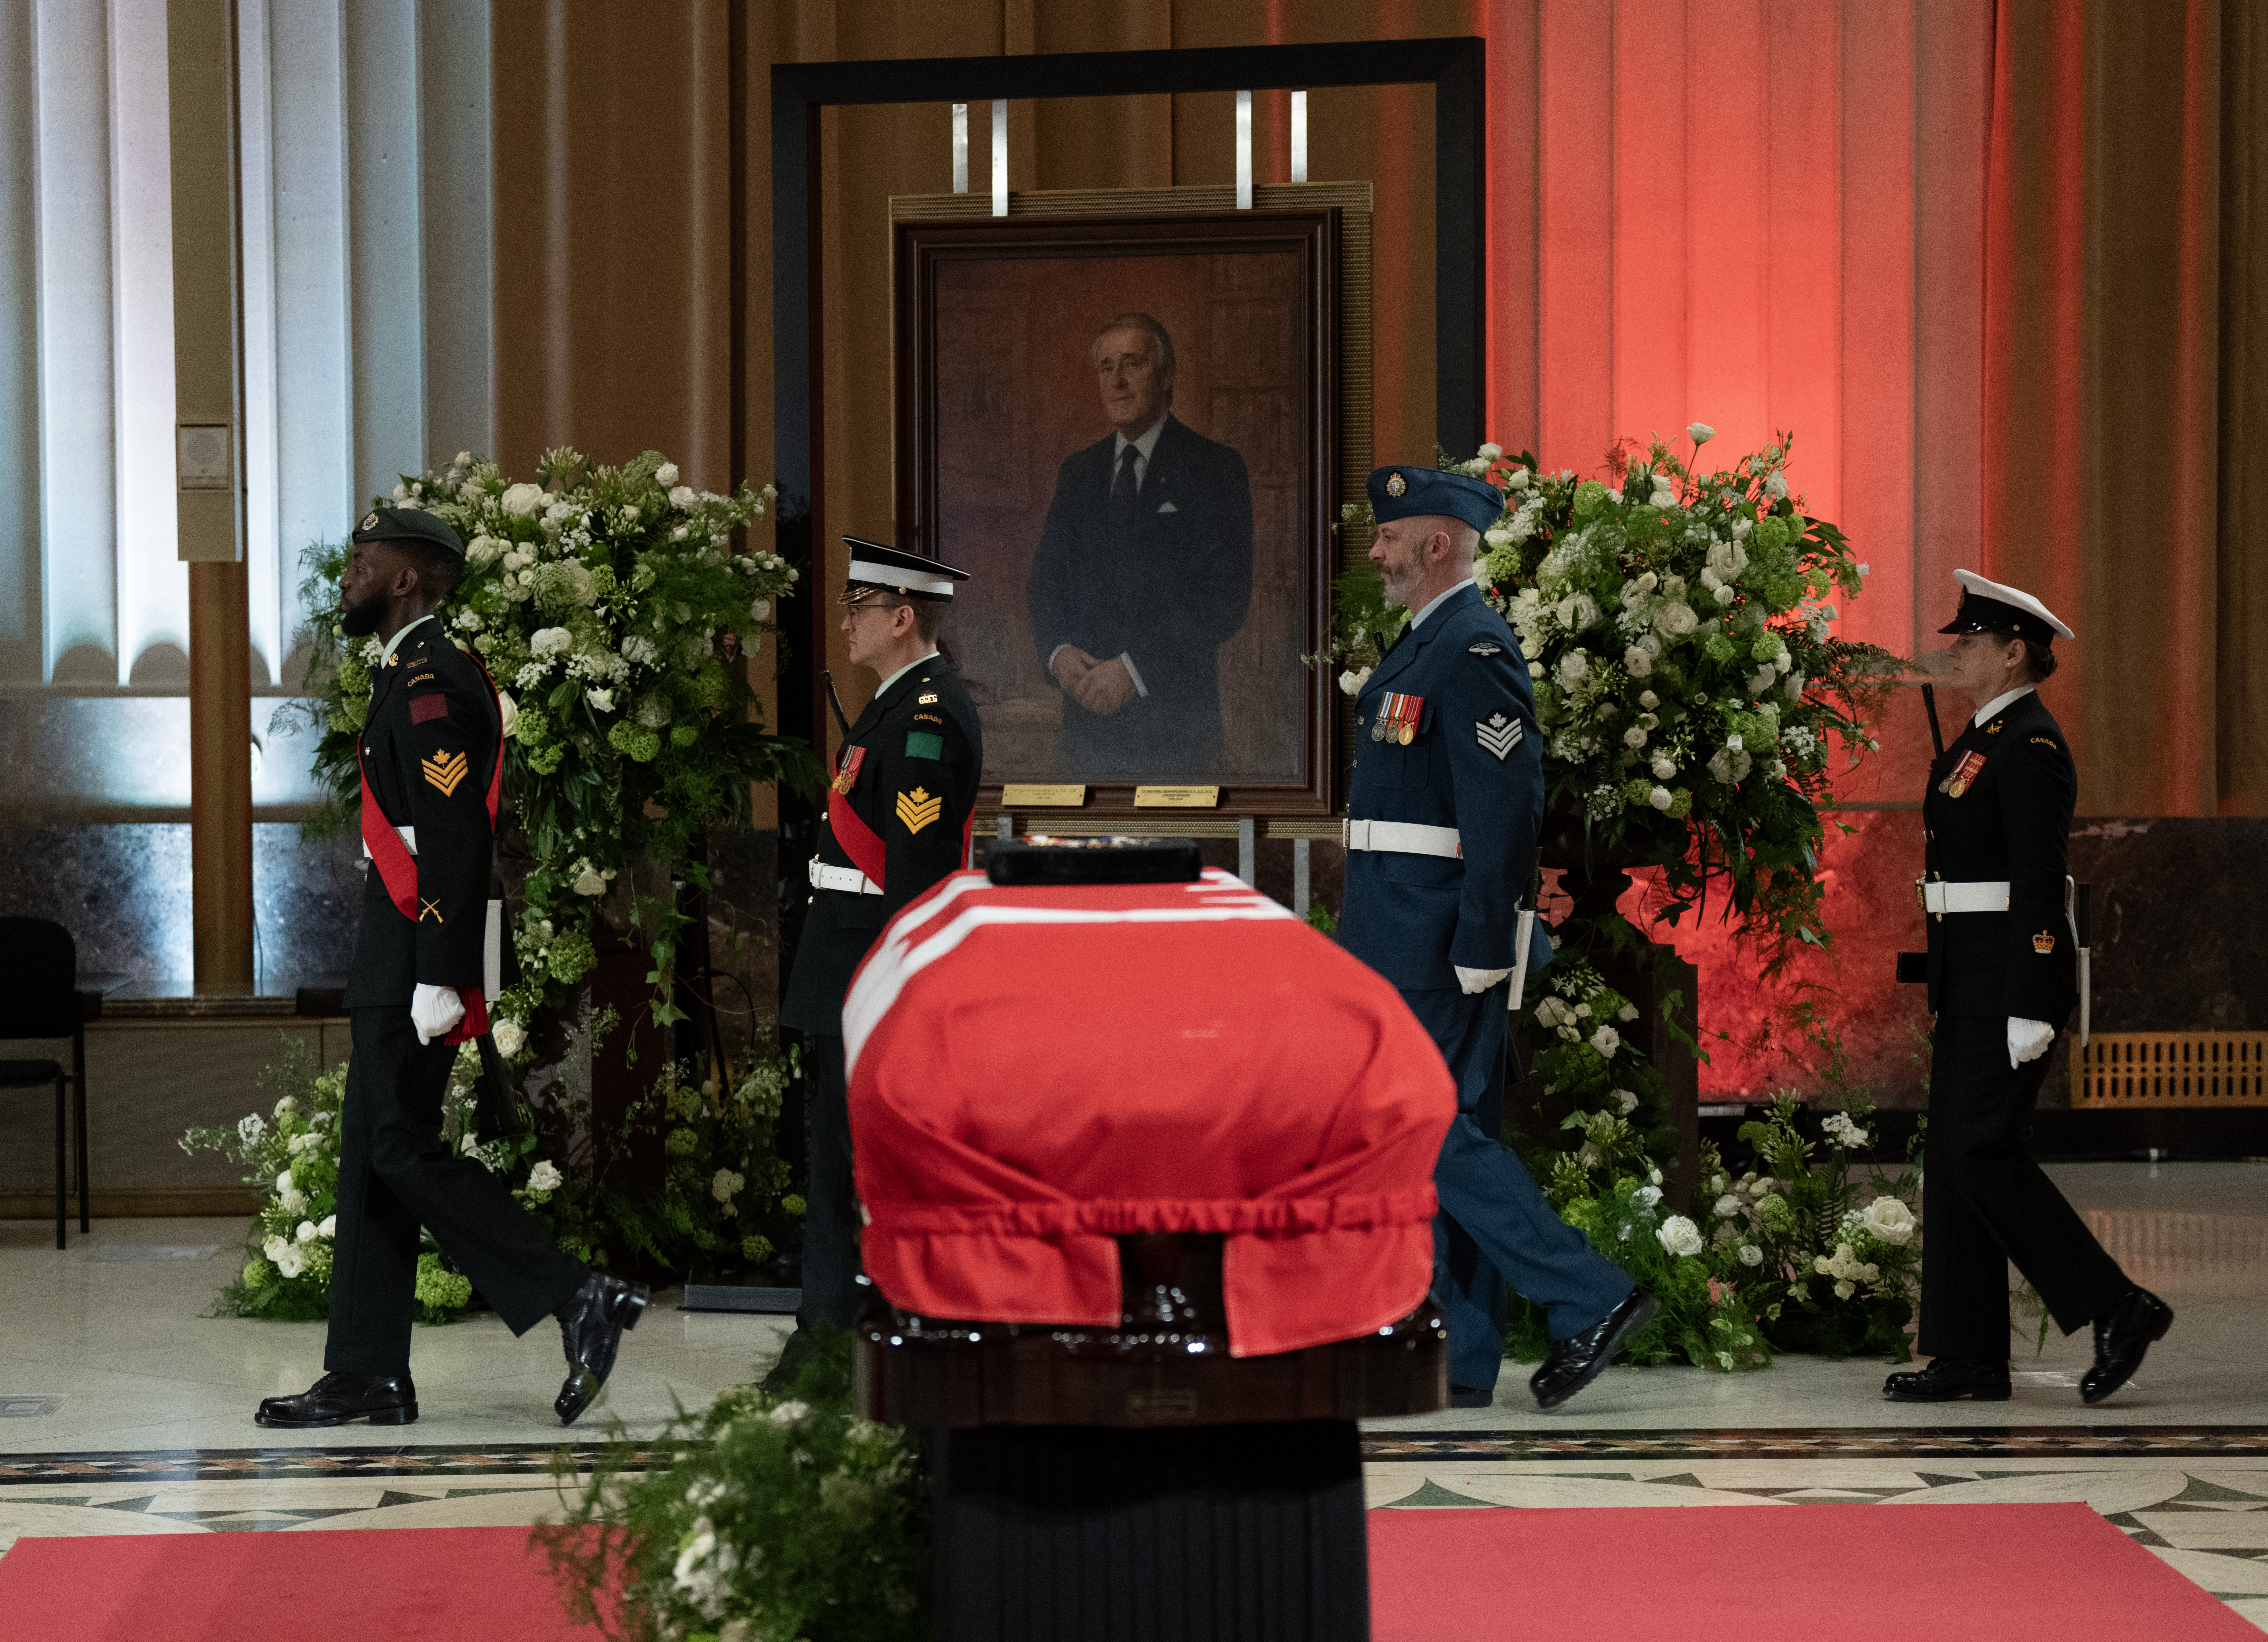 Brian Mulroney public tribute moves to Montreal ahead of state funeral